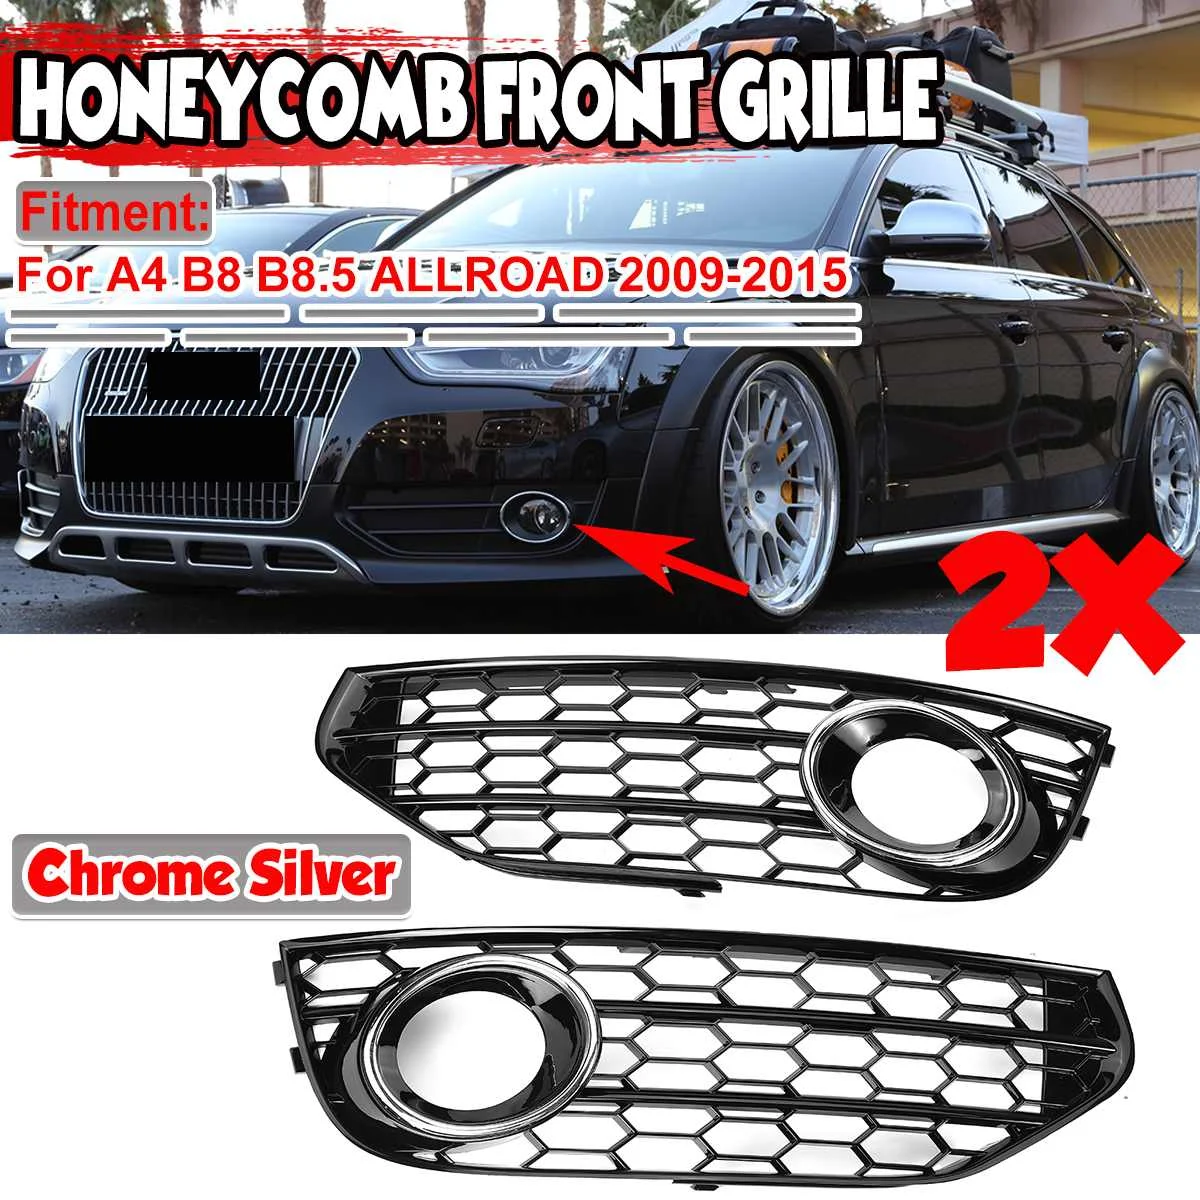 

HONEYCOMB HEX A4 2x Car Front Fog Light Grill Grille Fog Lamp Cover Trim For AUDI A4 B8 B8.5 Allroad Quattro Wagon 2009-2015